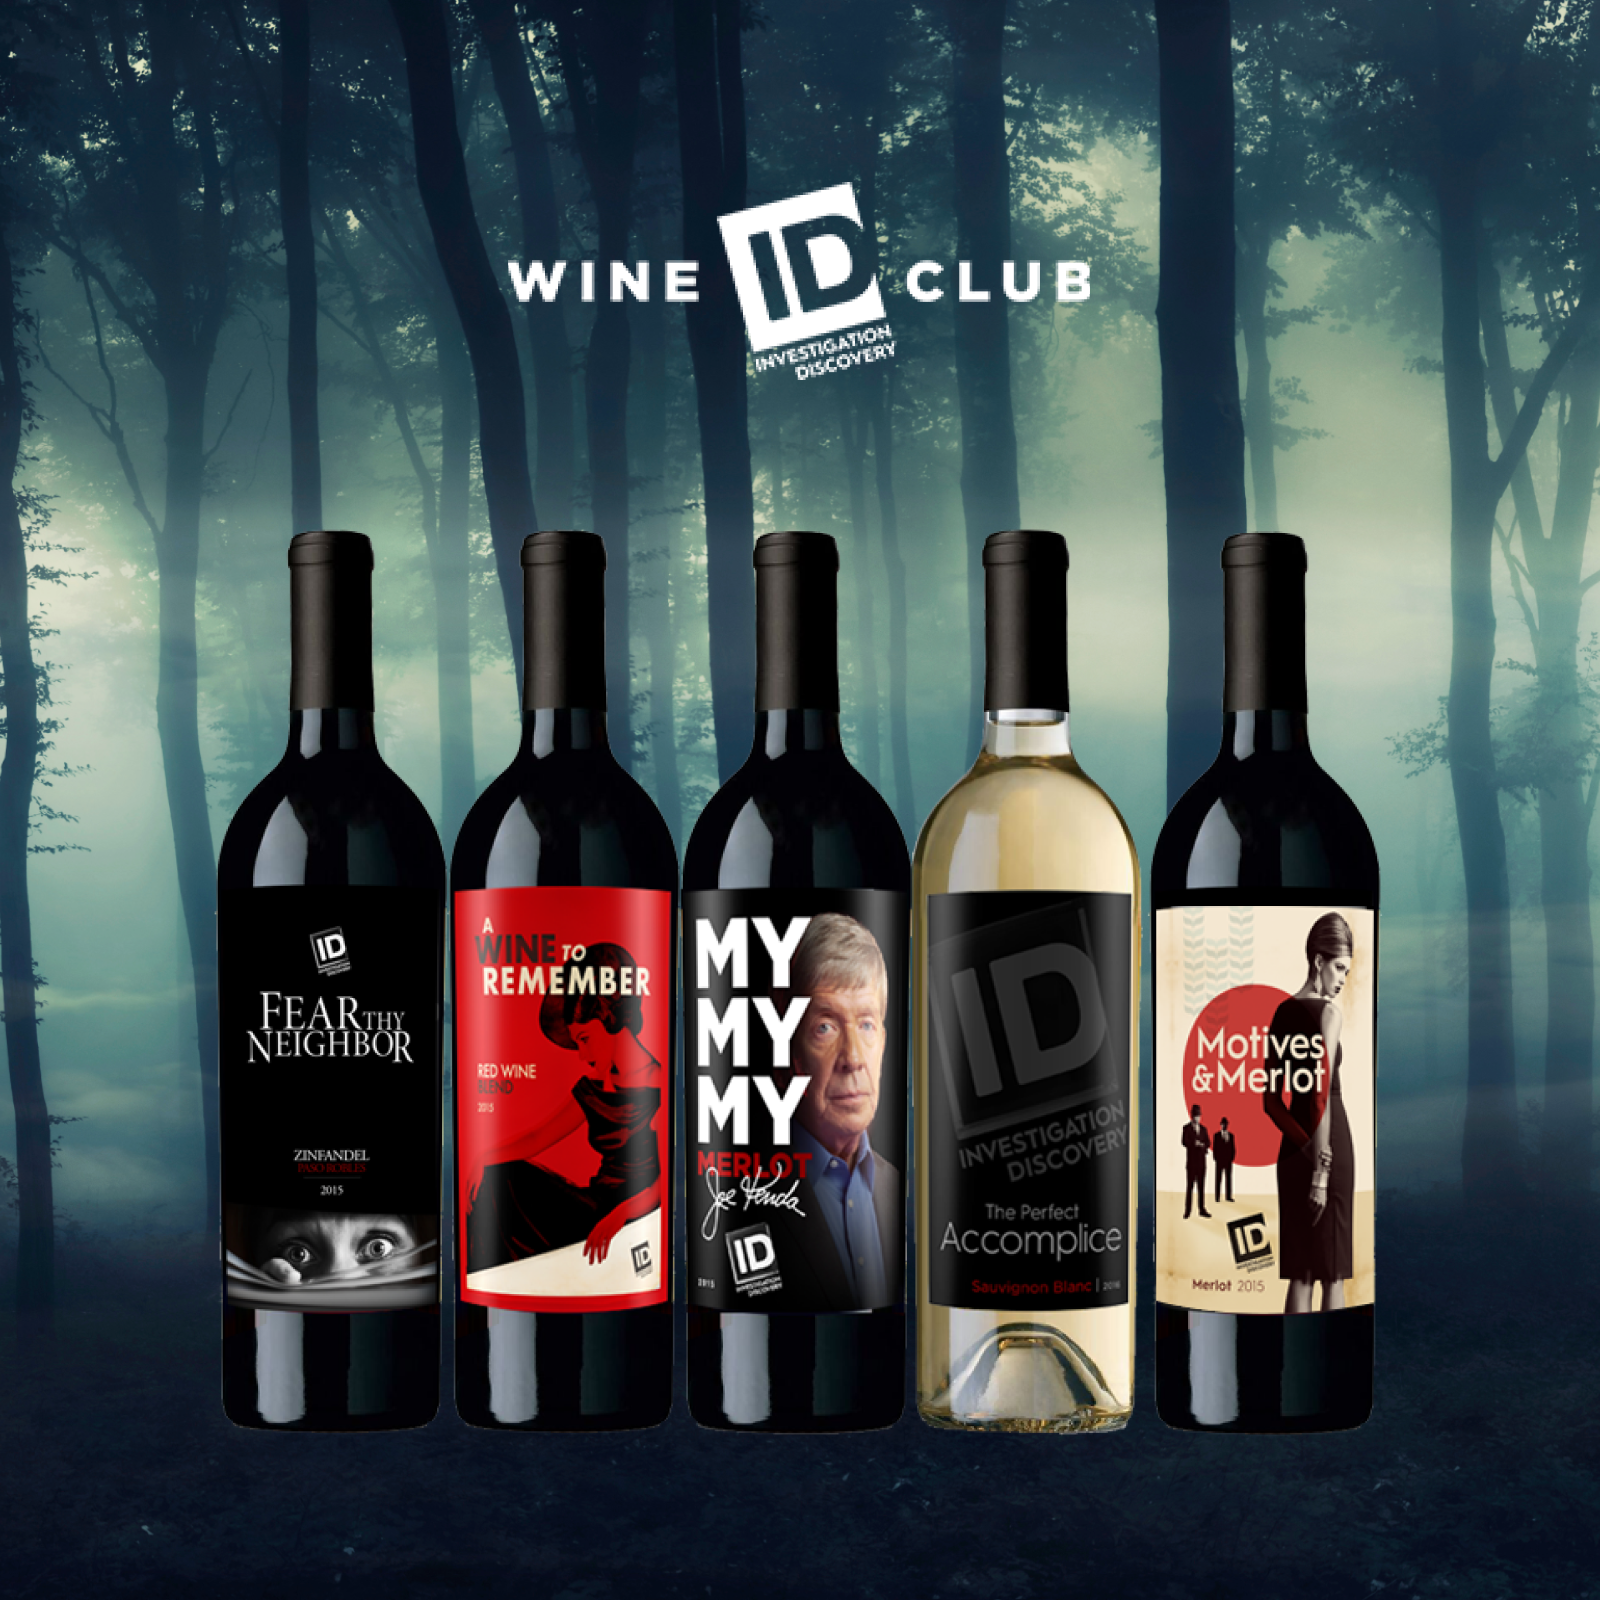 4 Wine ID (Investigation Discovery) Club branded wine bottles